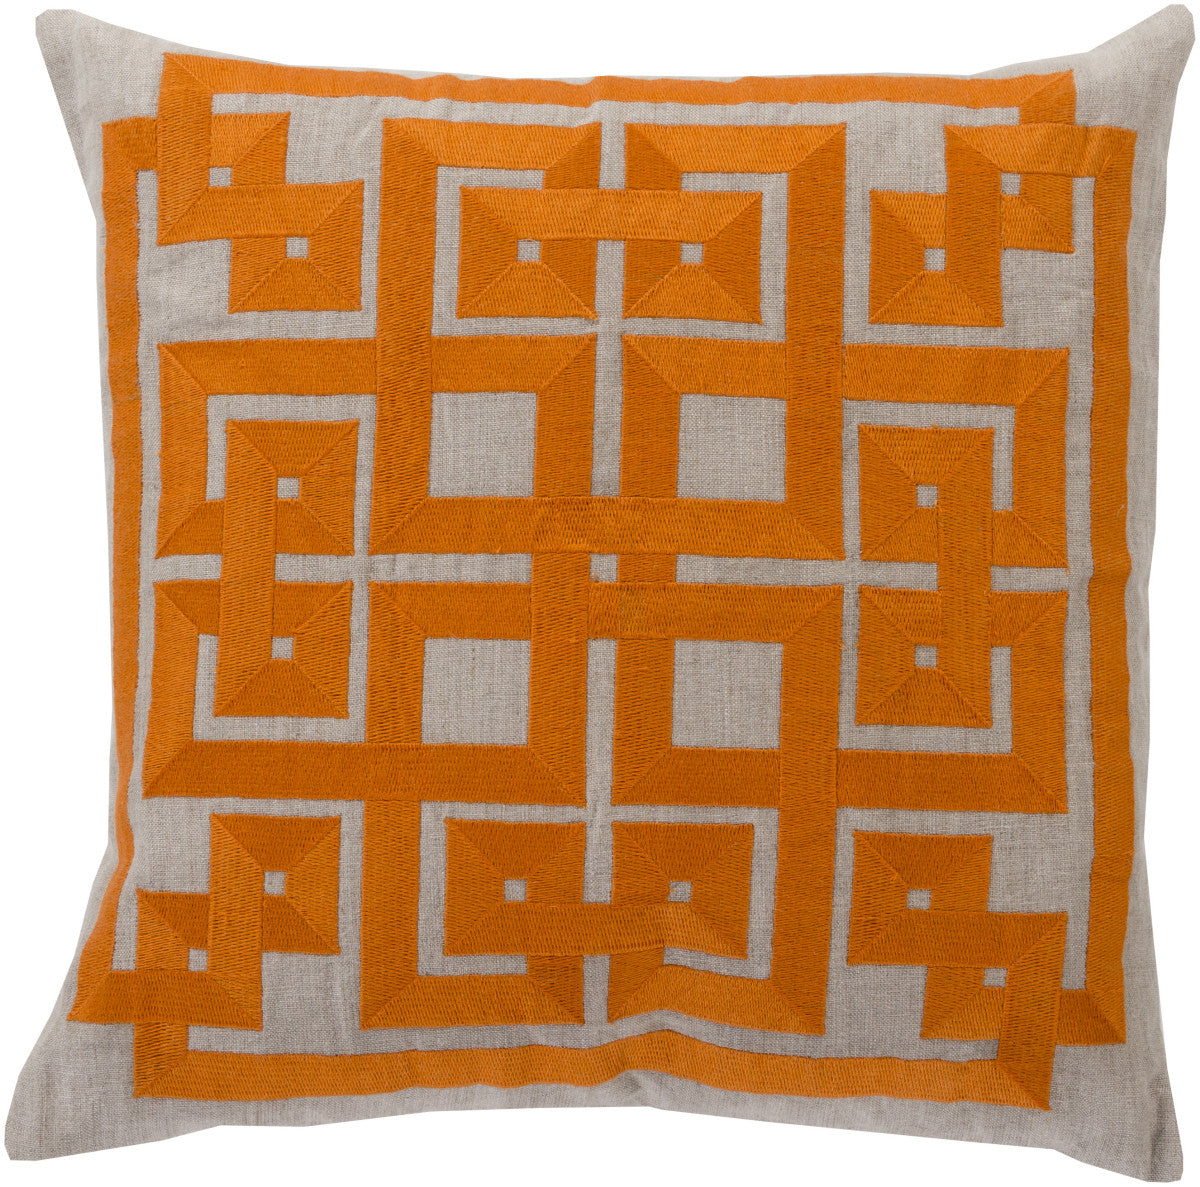 Surya Gramercy Intersected Geometrics LD-003 Pillow by Beth Lacefield